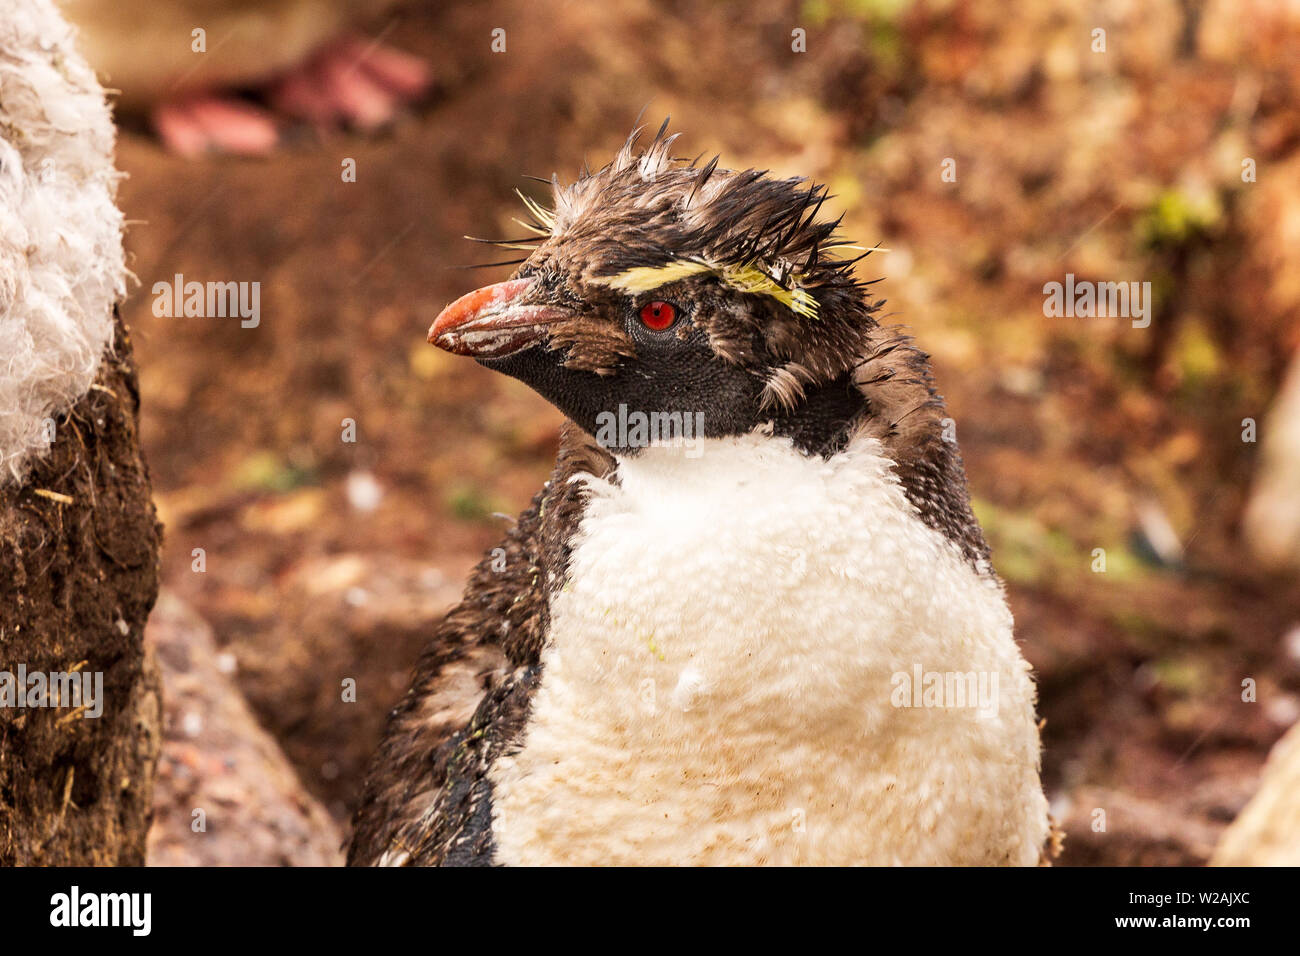 a rockhopper penguin on the Falkland islands has just vigorously shaken its head and its crested feathers look like they have been hair gelled Stock Photo